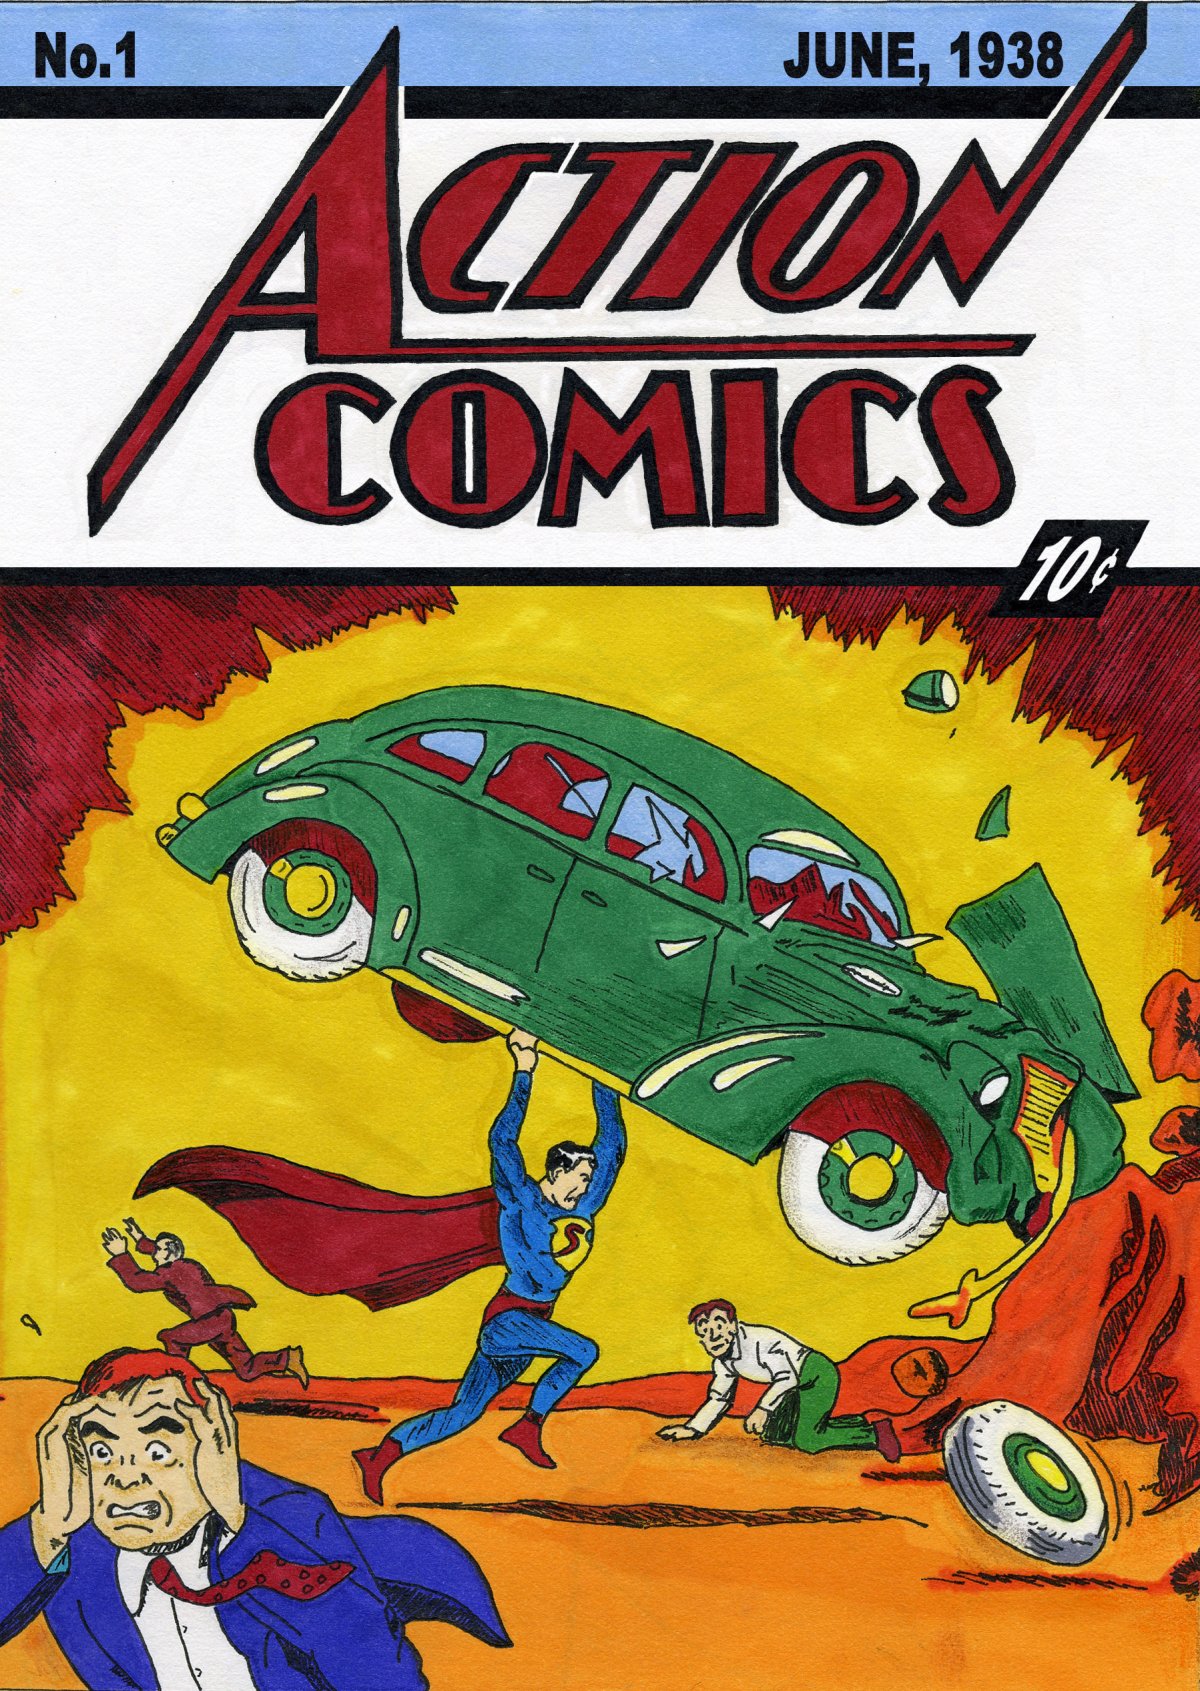 Action Comics No. 1 from June of 1938, featuring the debut of comic book icon Clark Kent AKA Superman.